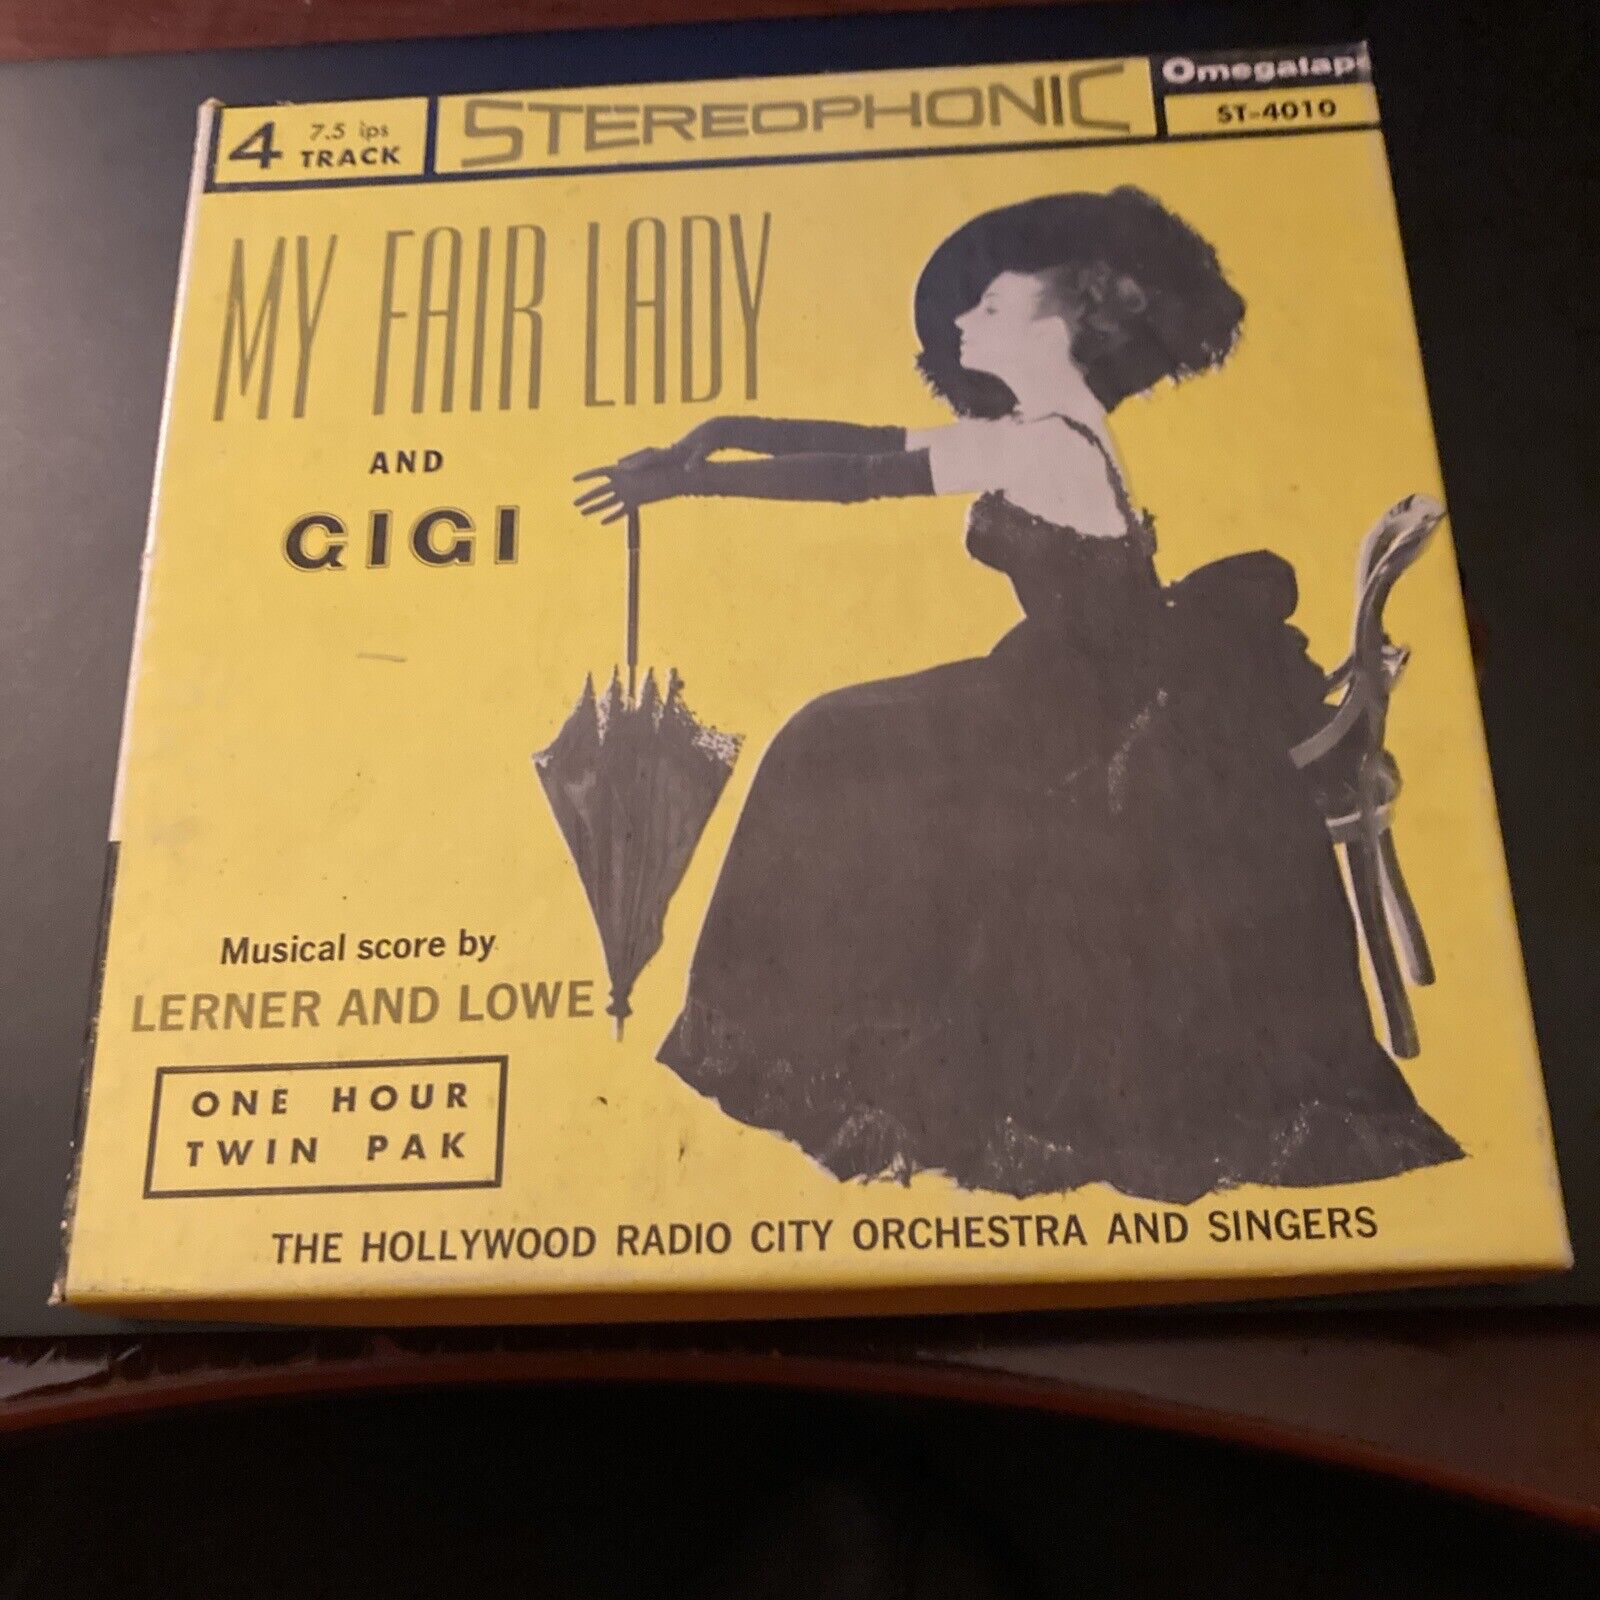 My Fair Lady And Gigi Soundtrack Reel To Reel Tape ST-4010